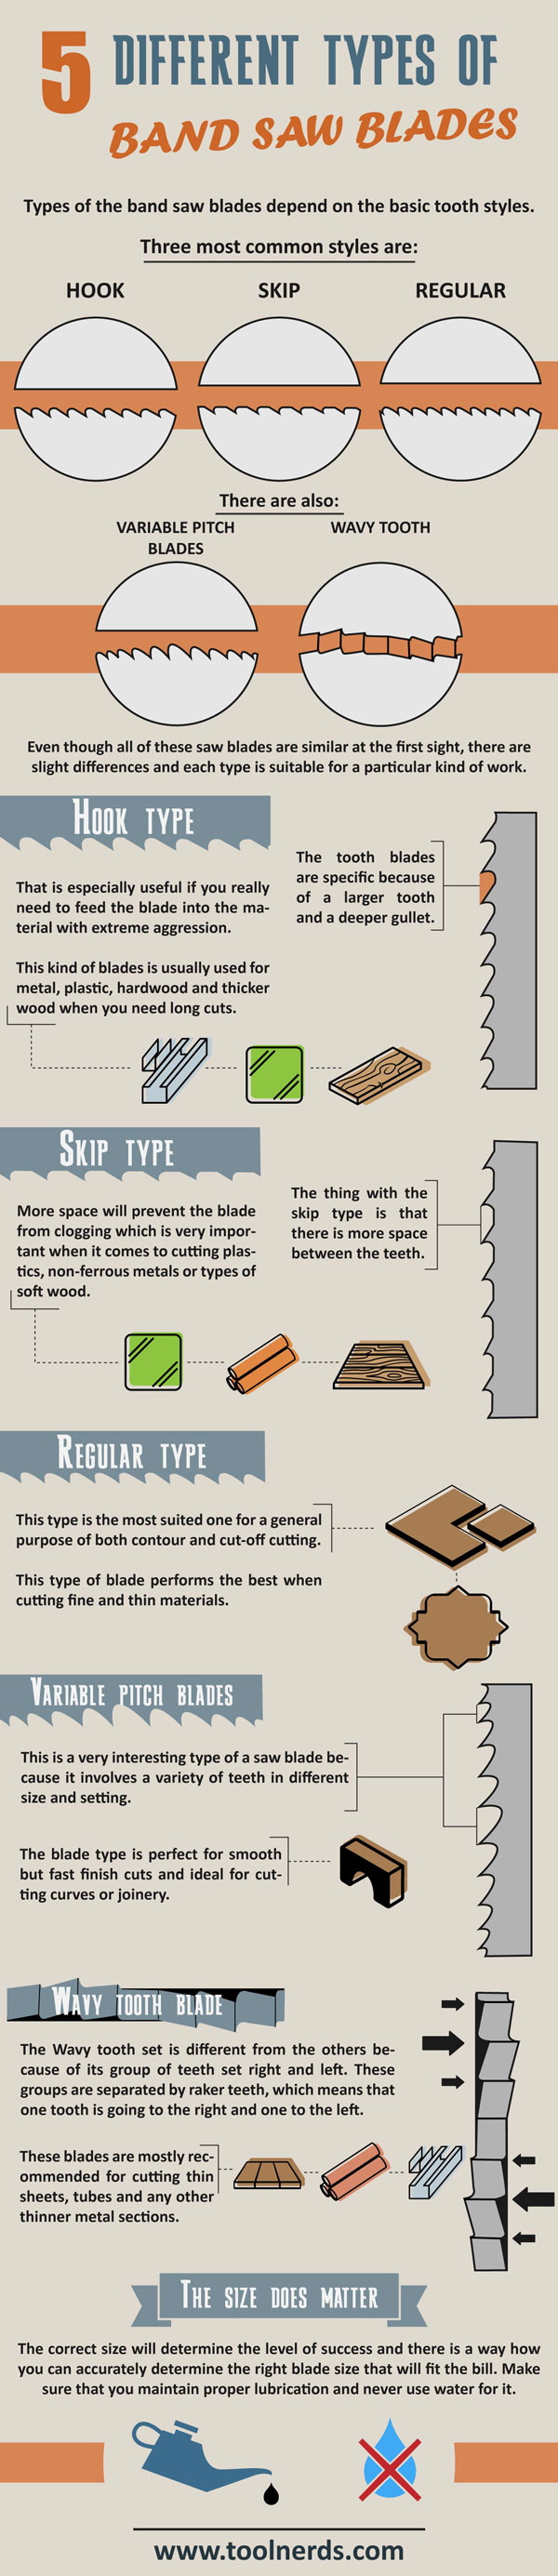 5 Different Types of Band Saw Blades Infographic